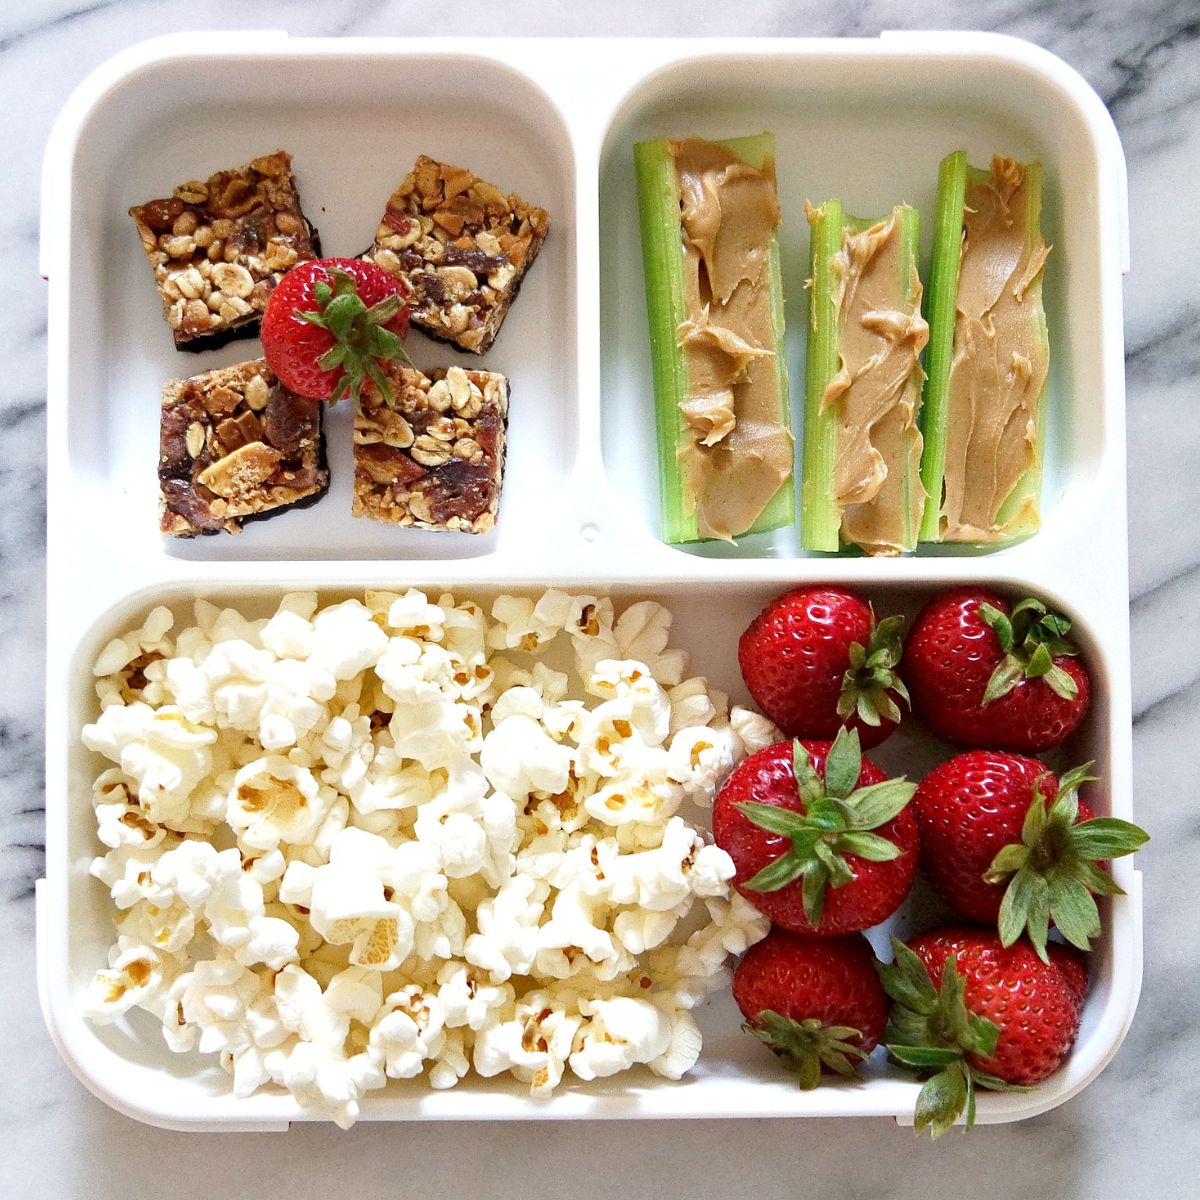 60 Bentgo Box Lunch Ideas - Friday We're In Love